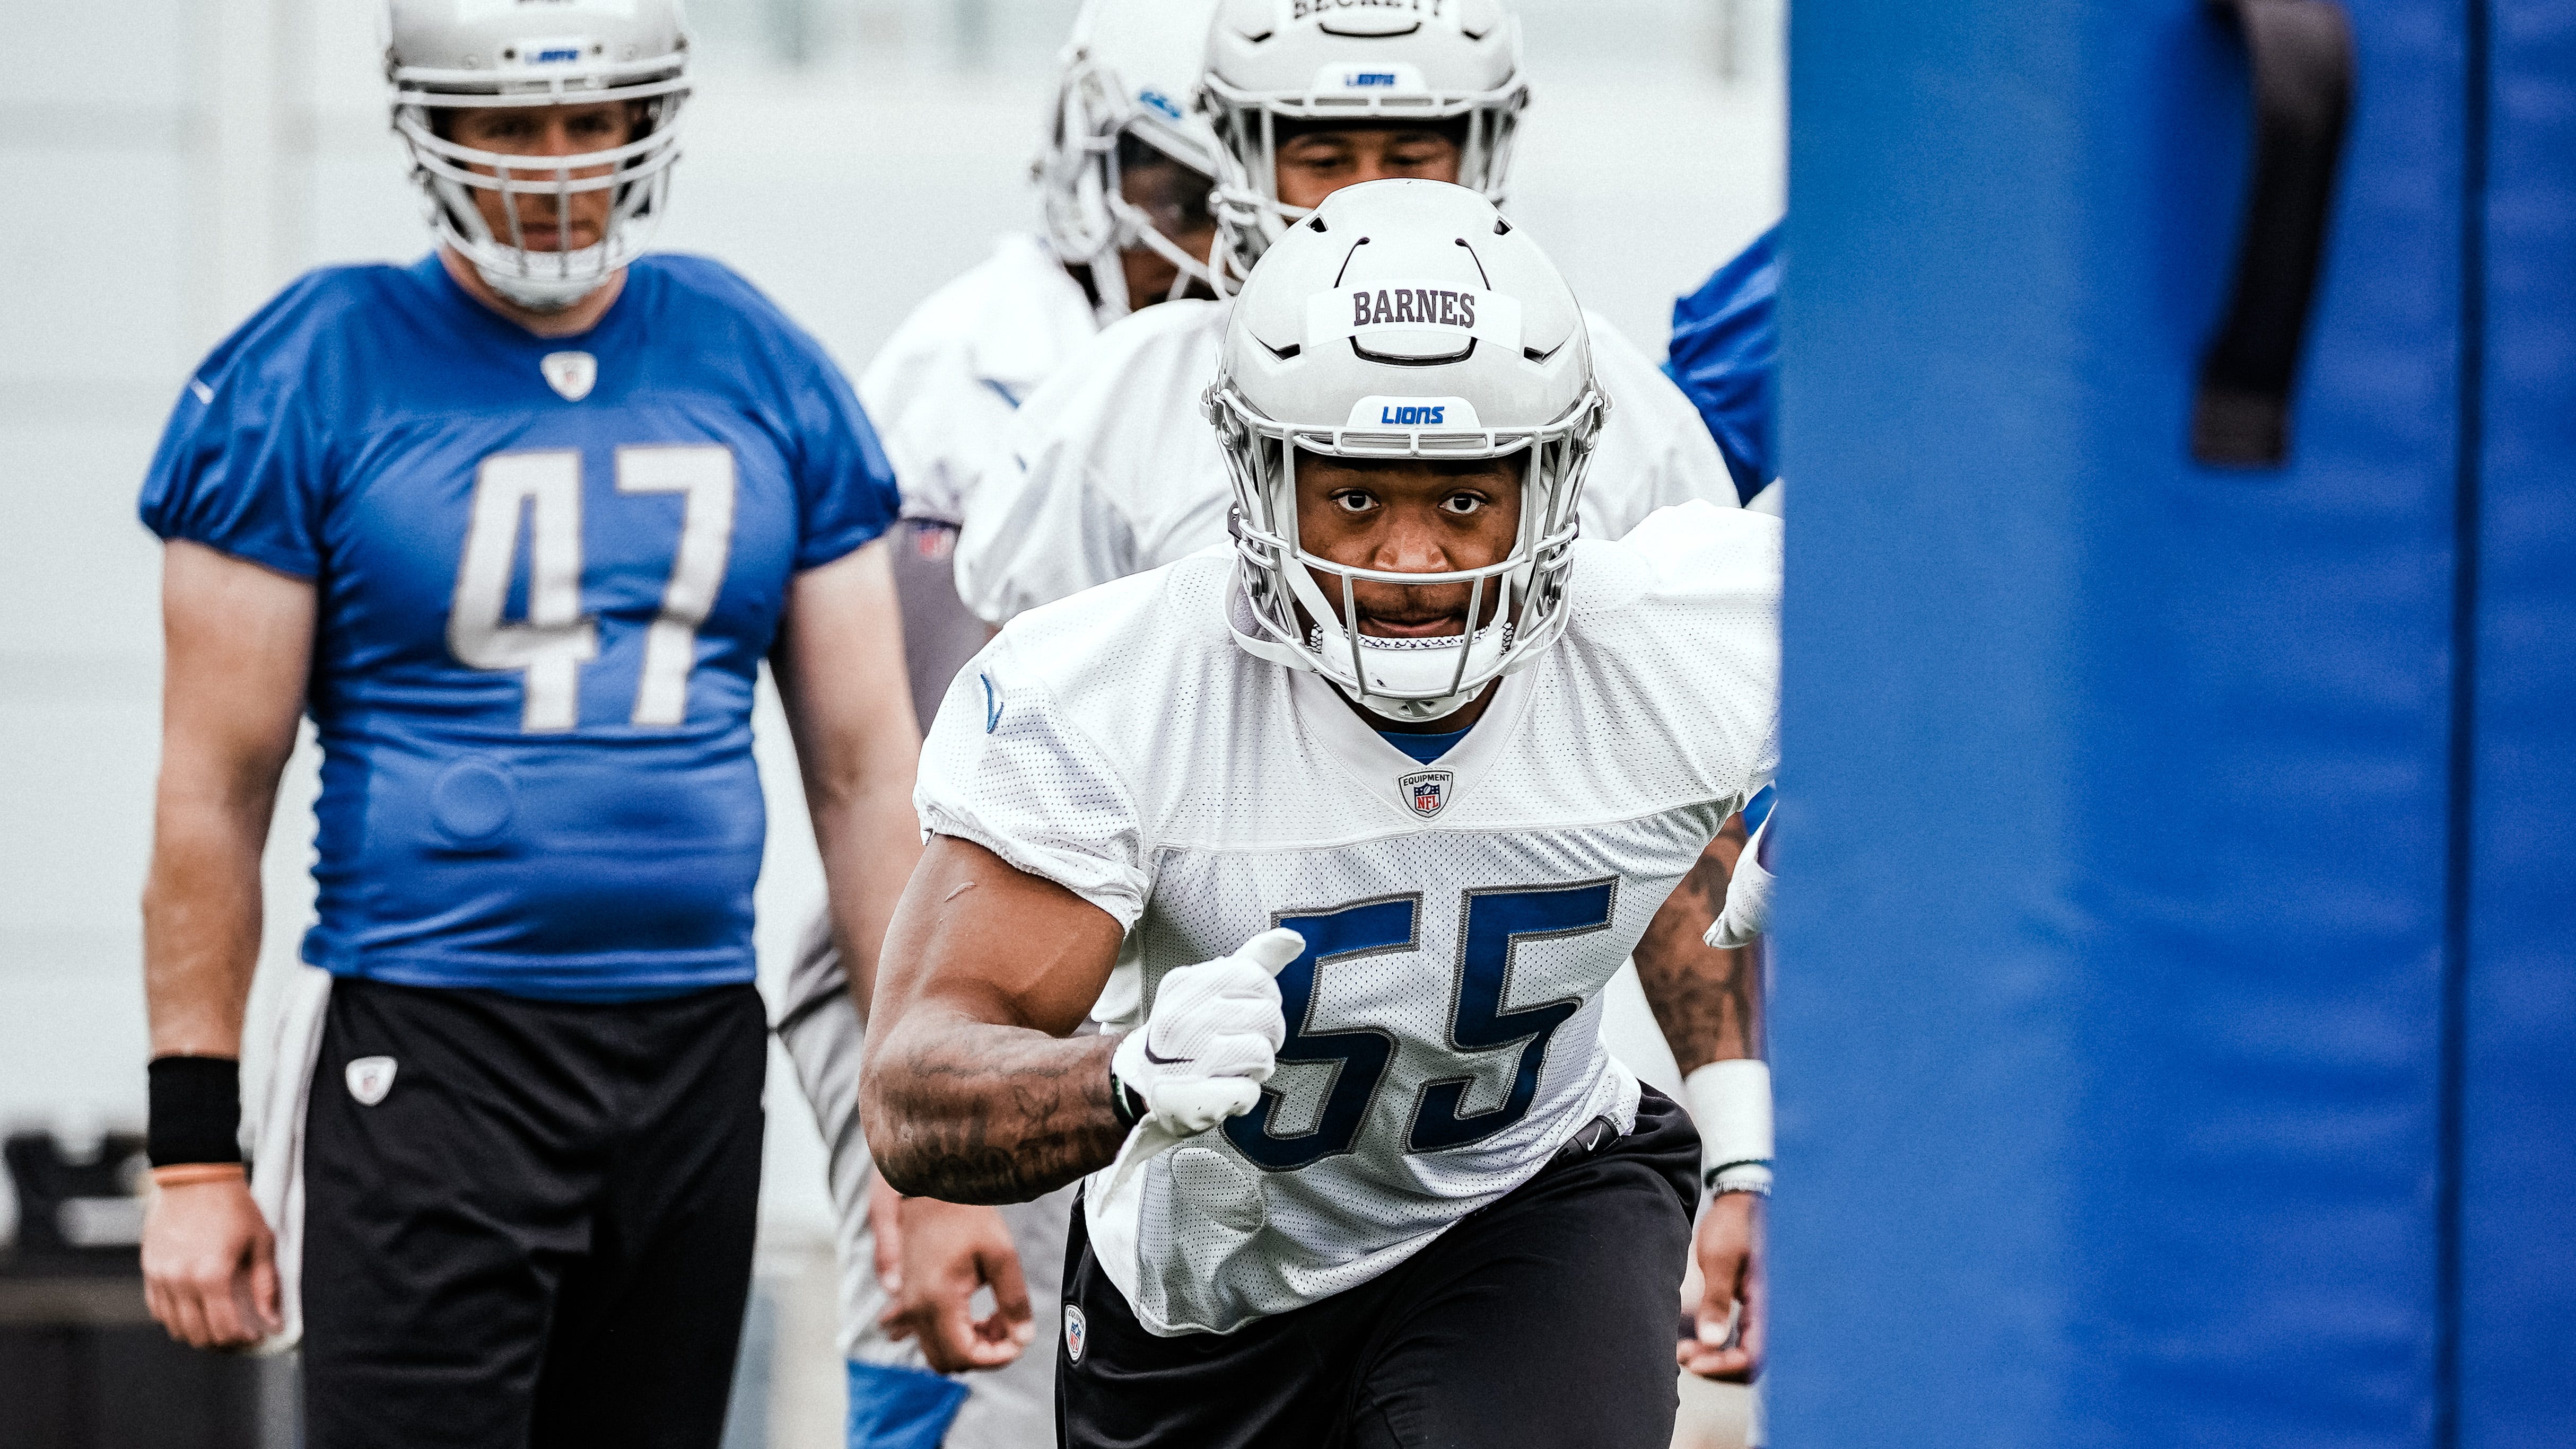 Derrick Barnes, a fourth-round pick out of Purdue, was one of a number of rookies who took part in the Lions rookie minicamp this weekend.